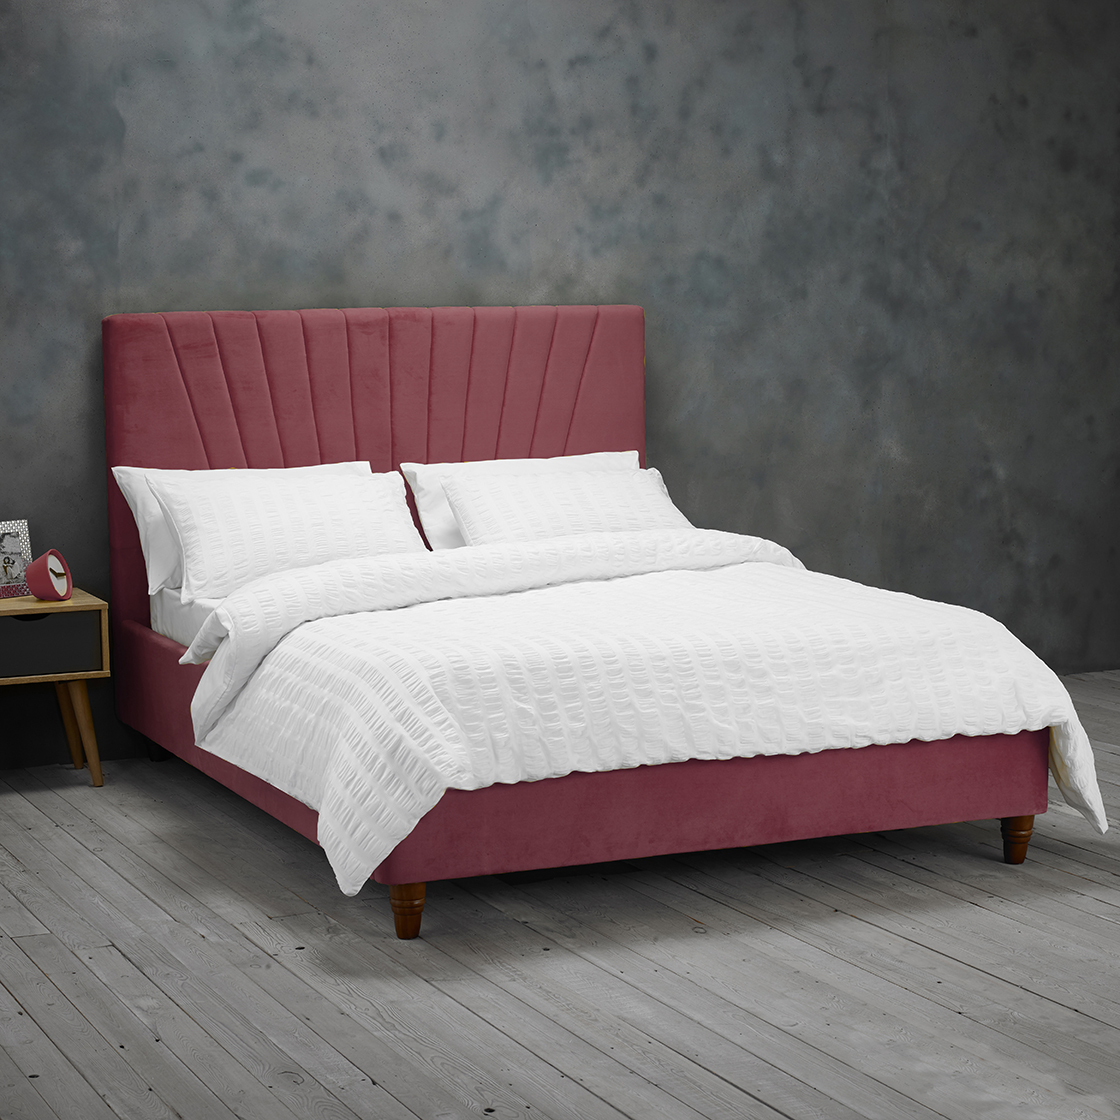 Lexie-Kingsize-Bed-Pink-LifeStyle